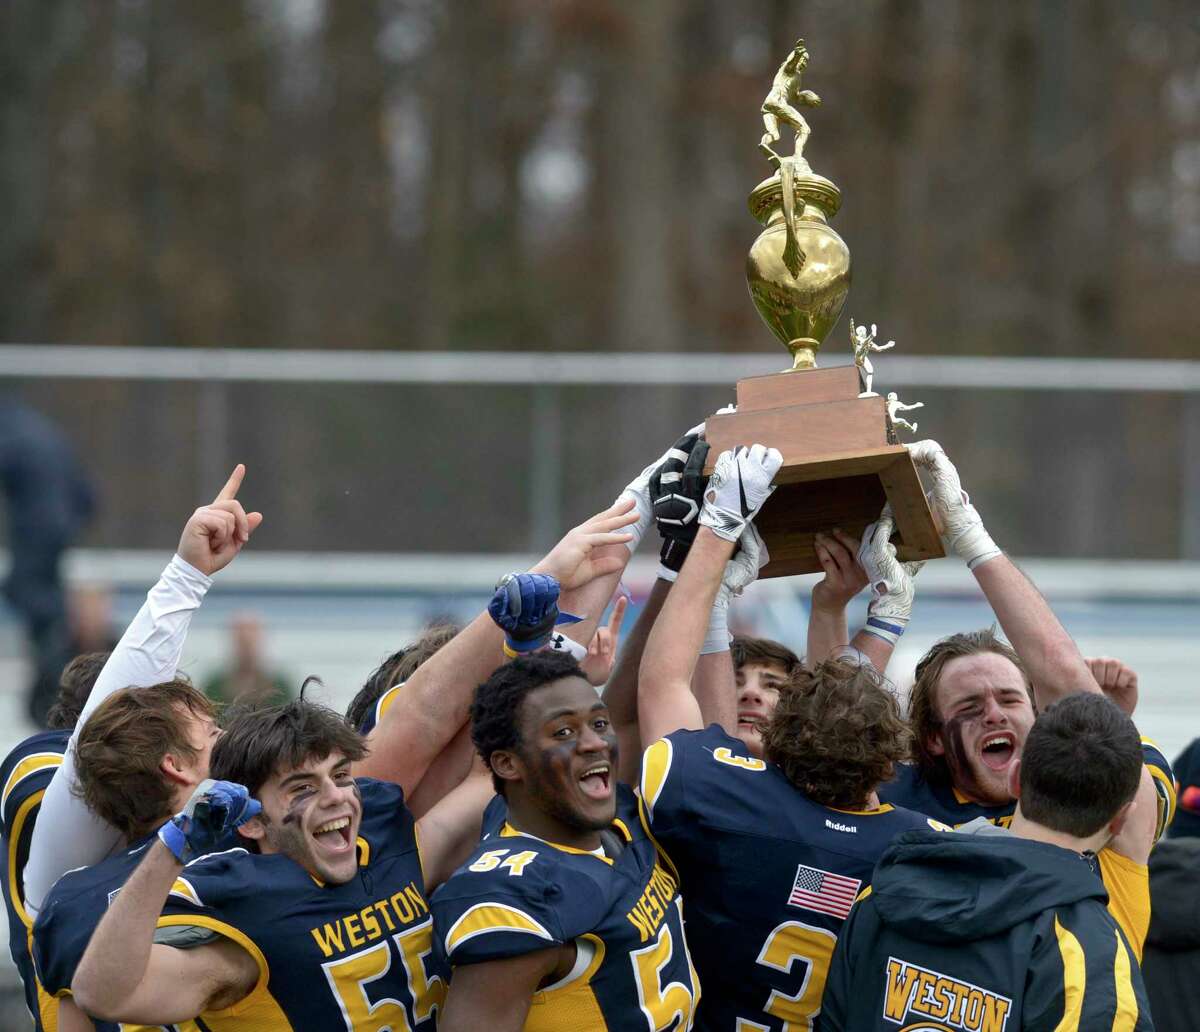 Weston seniors hold the trophy after winning the Thanksgiving football game between Joel Barlow and Weston high schools. Thursday, November 28, 2019, at Weston High School, Weston, Conn.